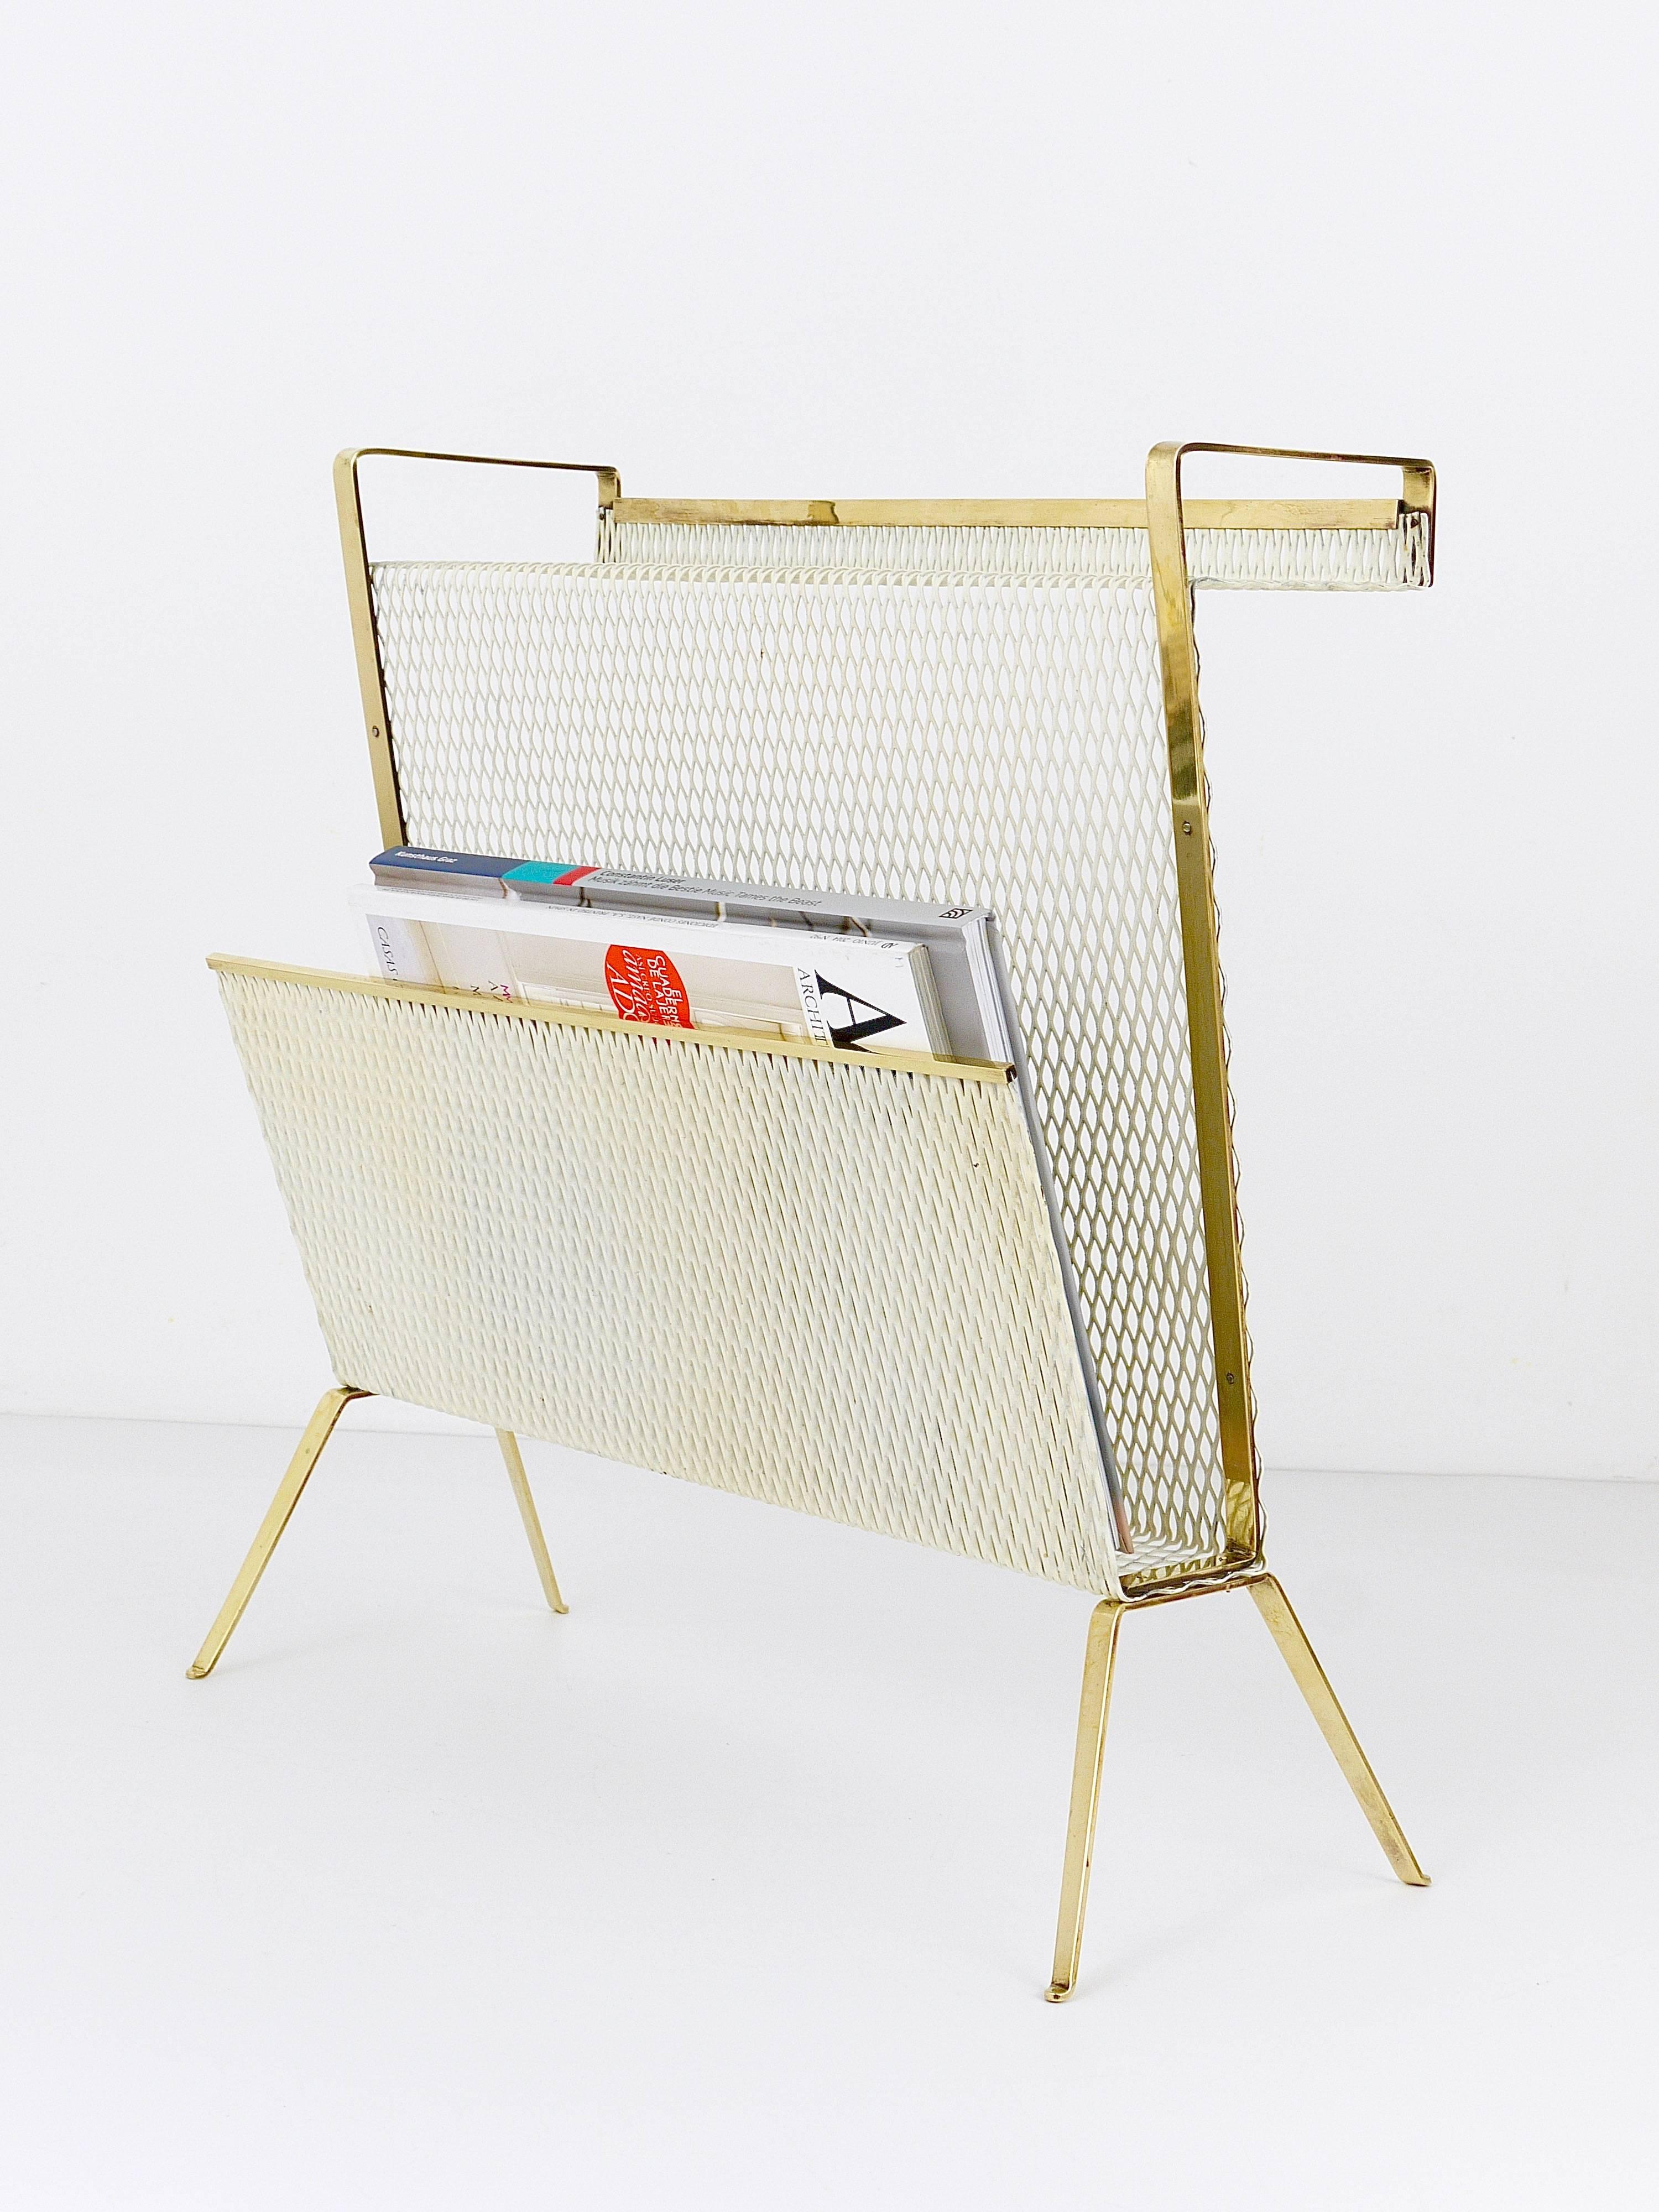 An beautiful asymmetrical modernist magazine holder news stand with brass frame and white perforated metal in the style of Mathieu Mategot. From the 1950s, made in France. A unusual piece in good condition with nice patina.